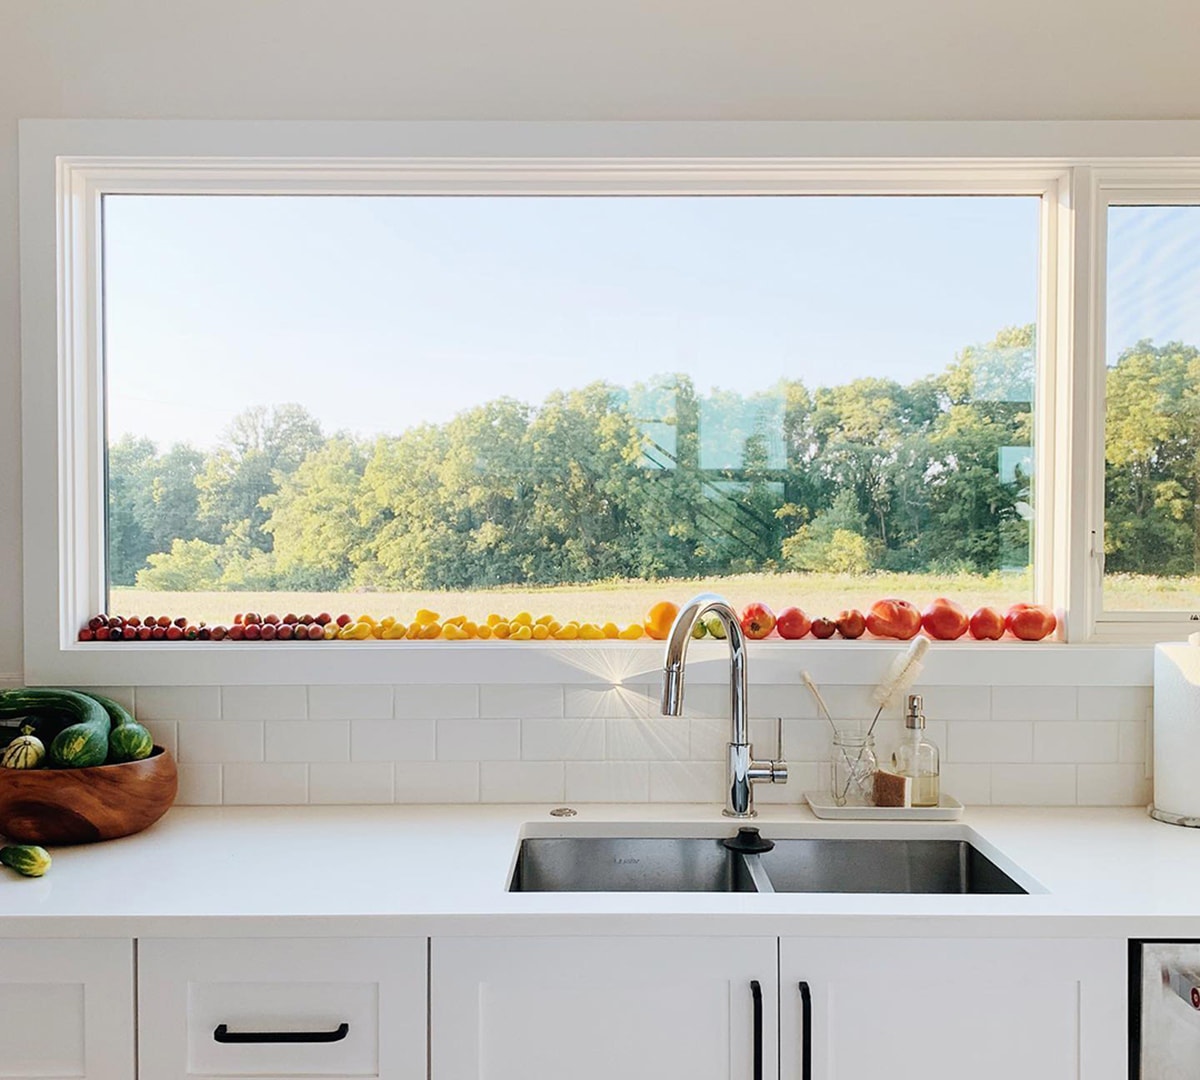 A white rectangular window over the kitchen sink acts as a shelf for resting an array of colorful produce.